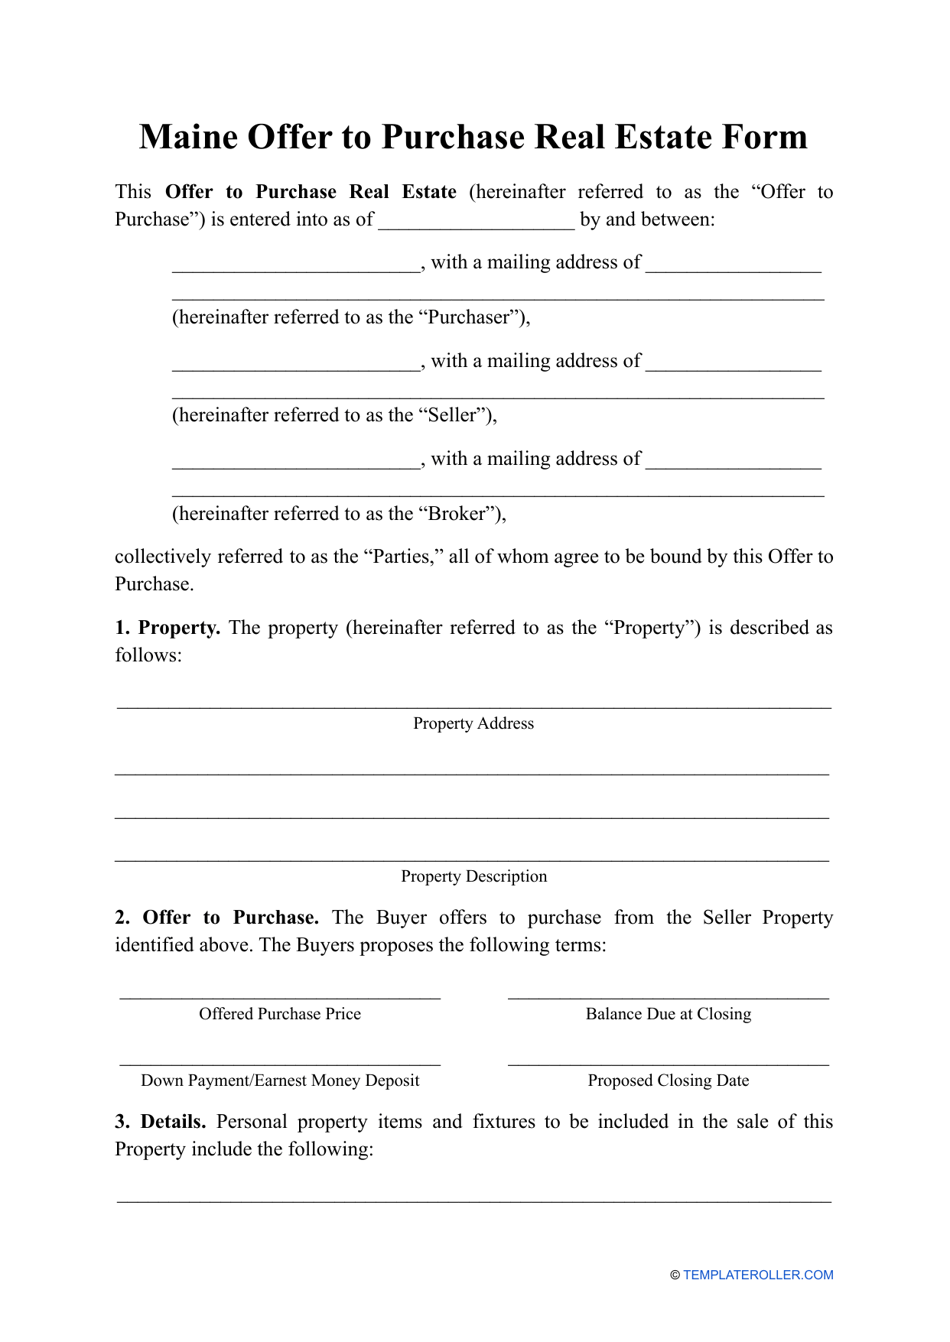 Offer to Purchase Real Estate Form - Maine, Page 1